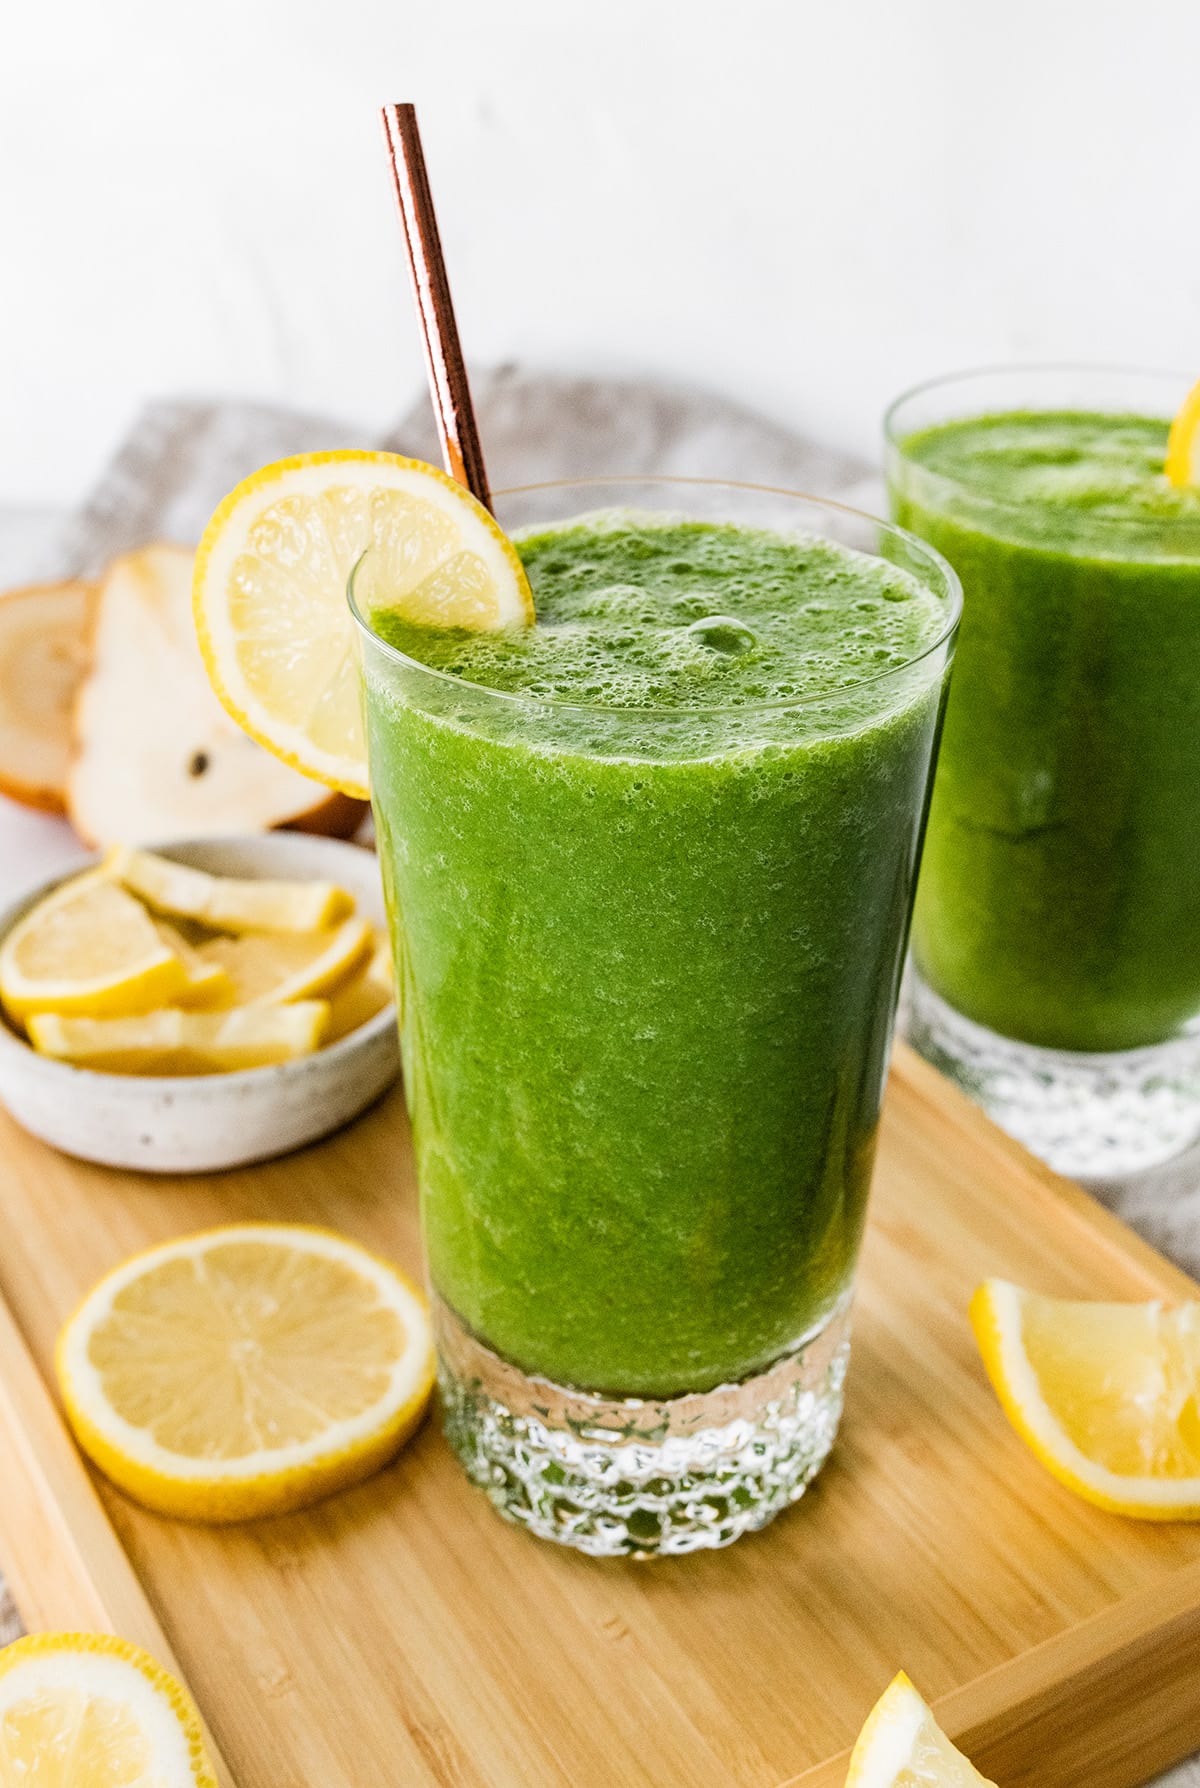 A green lemonade smoothie in a glass with a straw and fresh lemon slice.